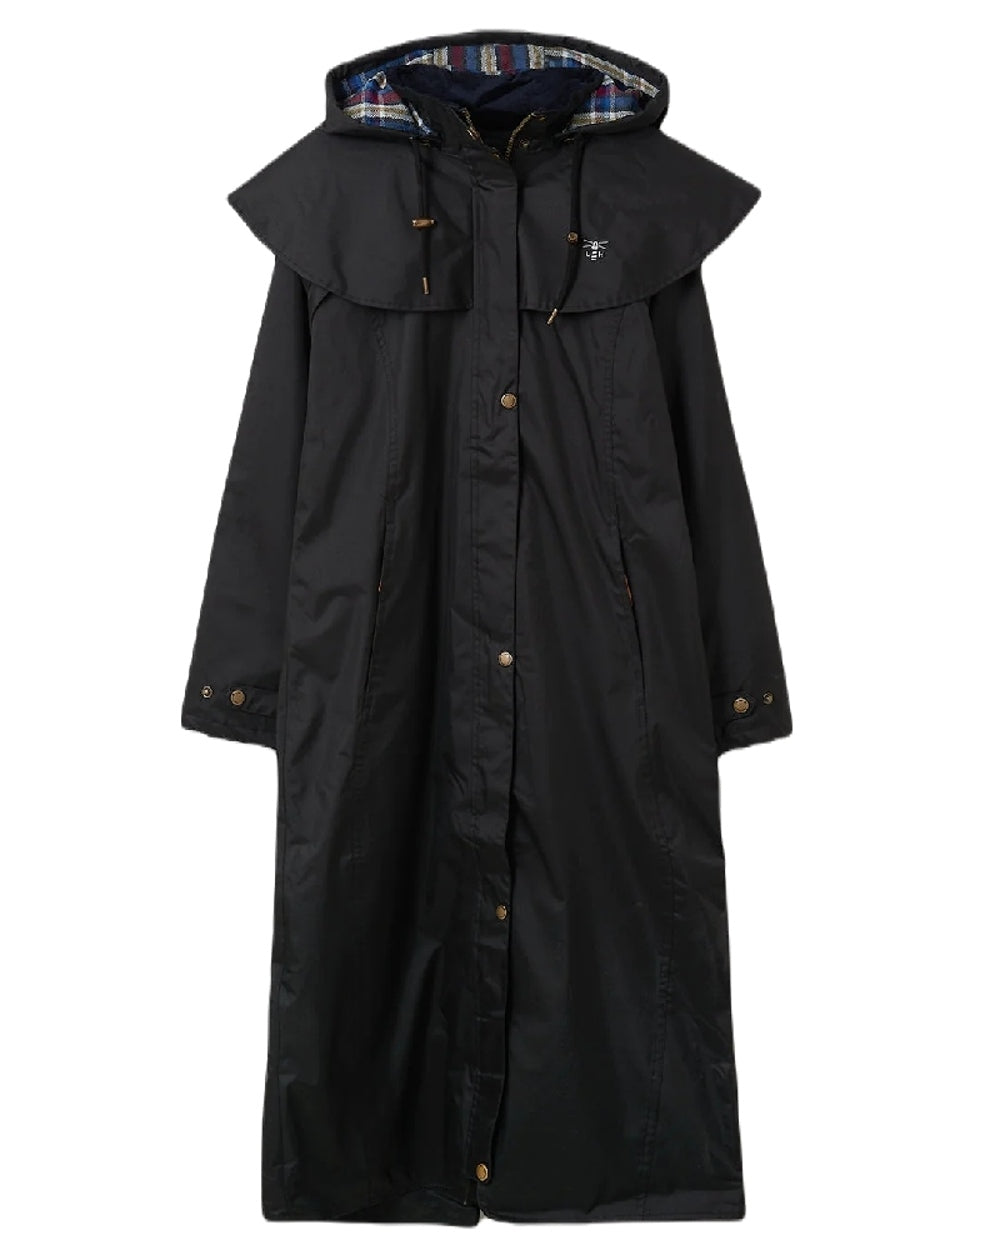 Black coloured Lighthouse Outback Full Length Ladies Waterproof Raincoat on White background 